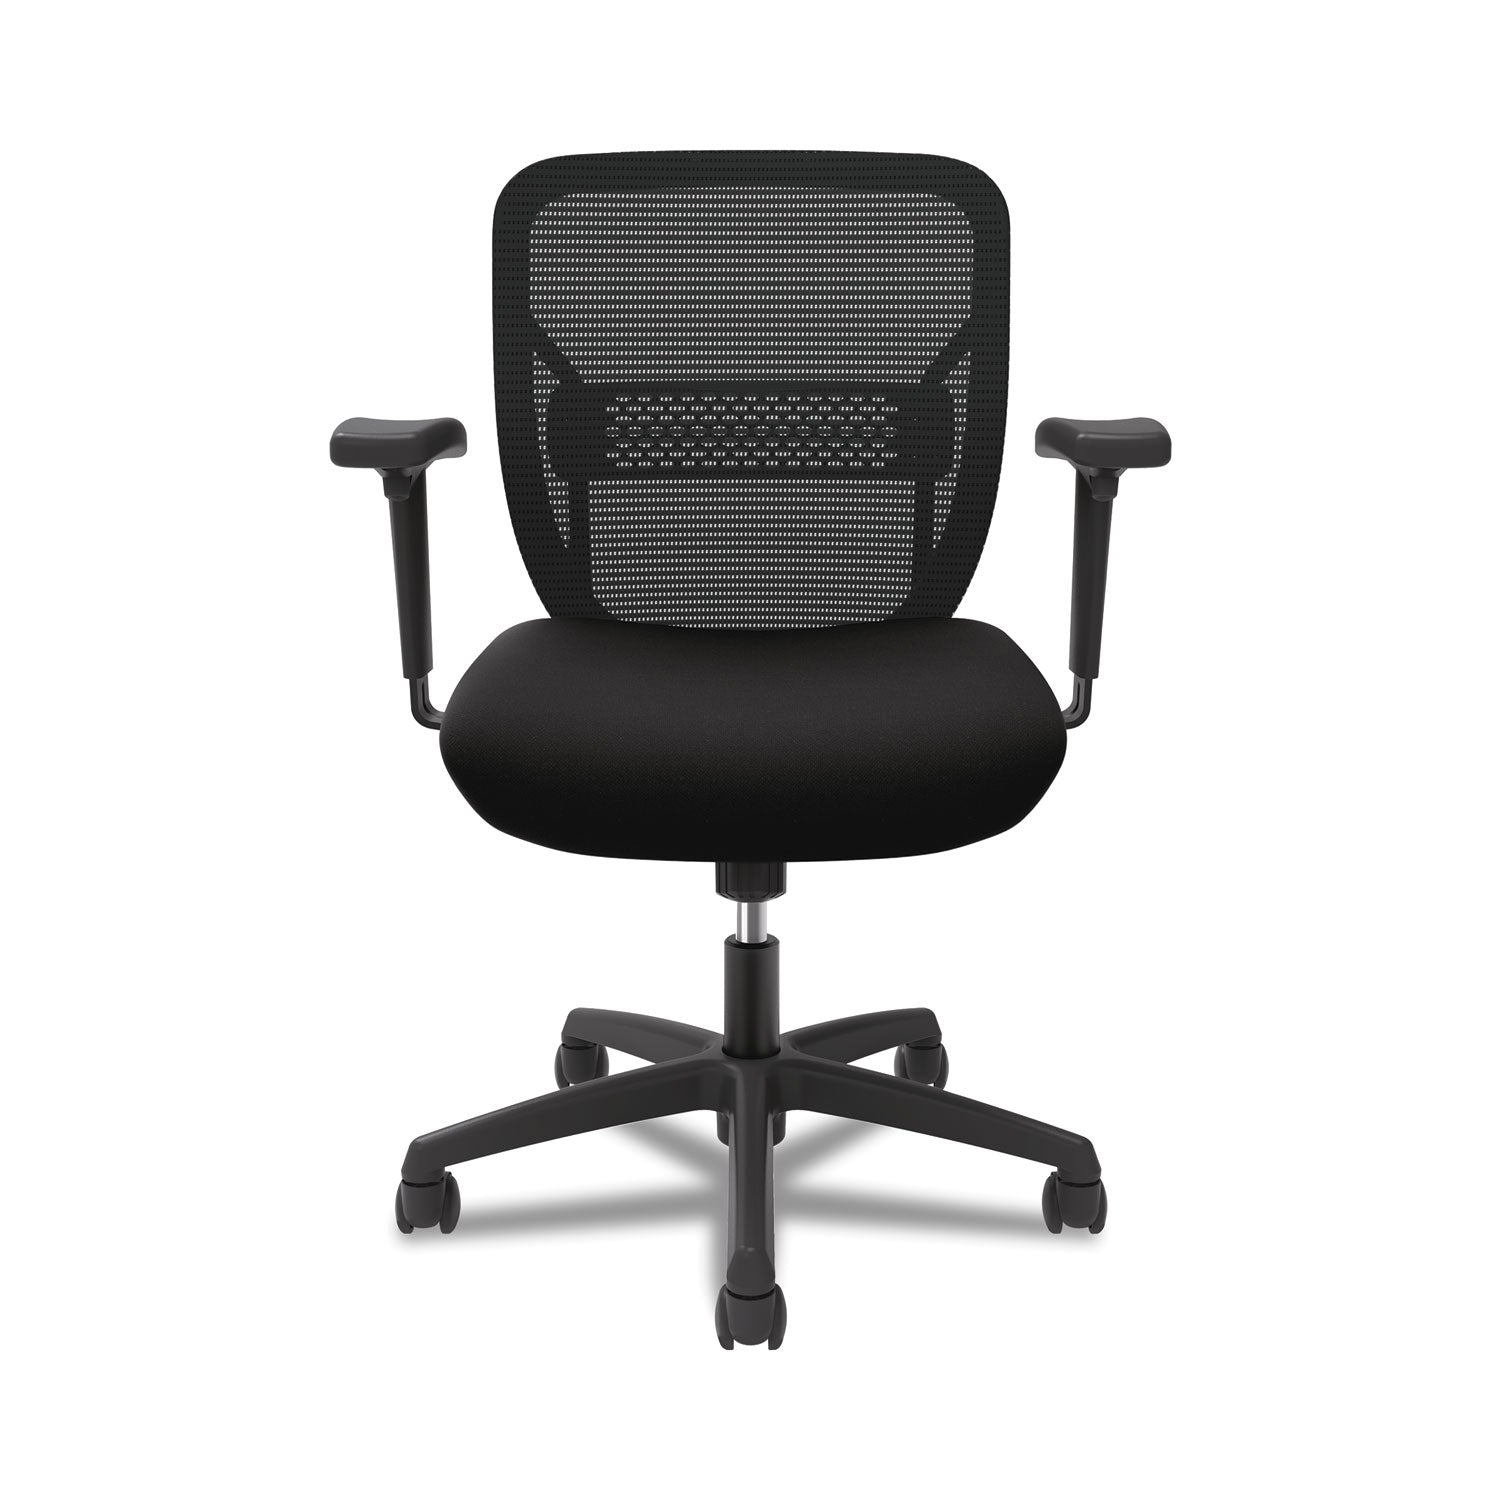 gateway-mid-back-task-chair-supports-up-to-250-lb-17-to-22-seat-height-black_hongvfmz1accf10 - 4